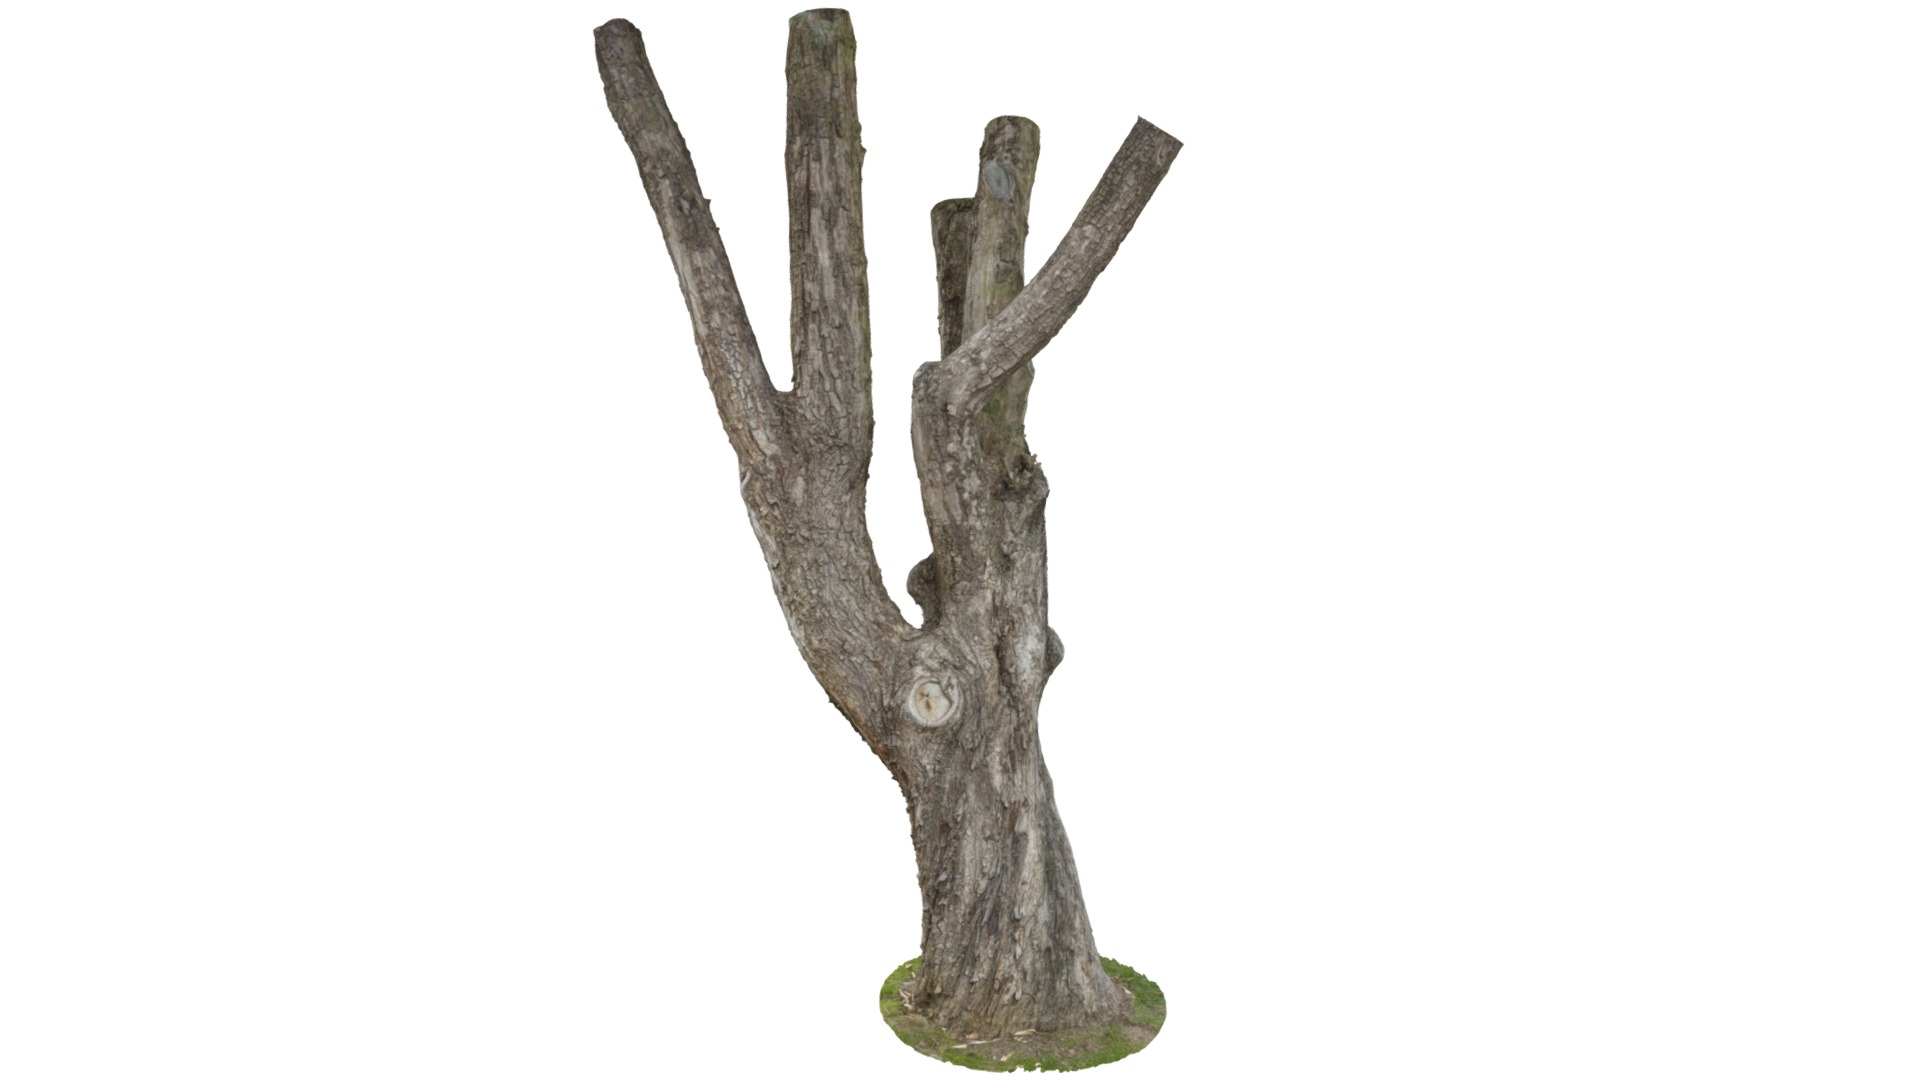 3D model Charles Barkley - This is a 3D model of the Charles Barkley. The 3D model is about a tree stump with a stick.